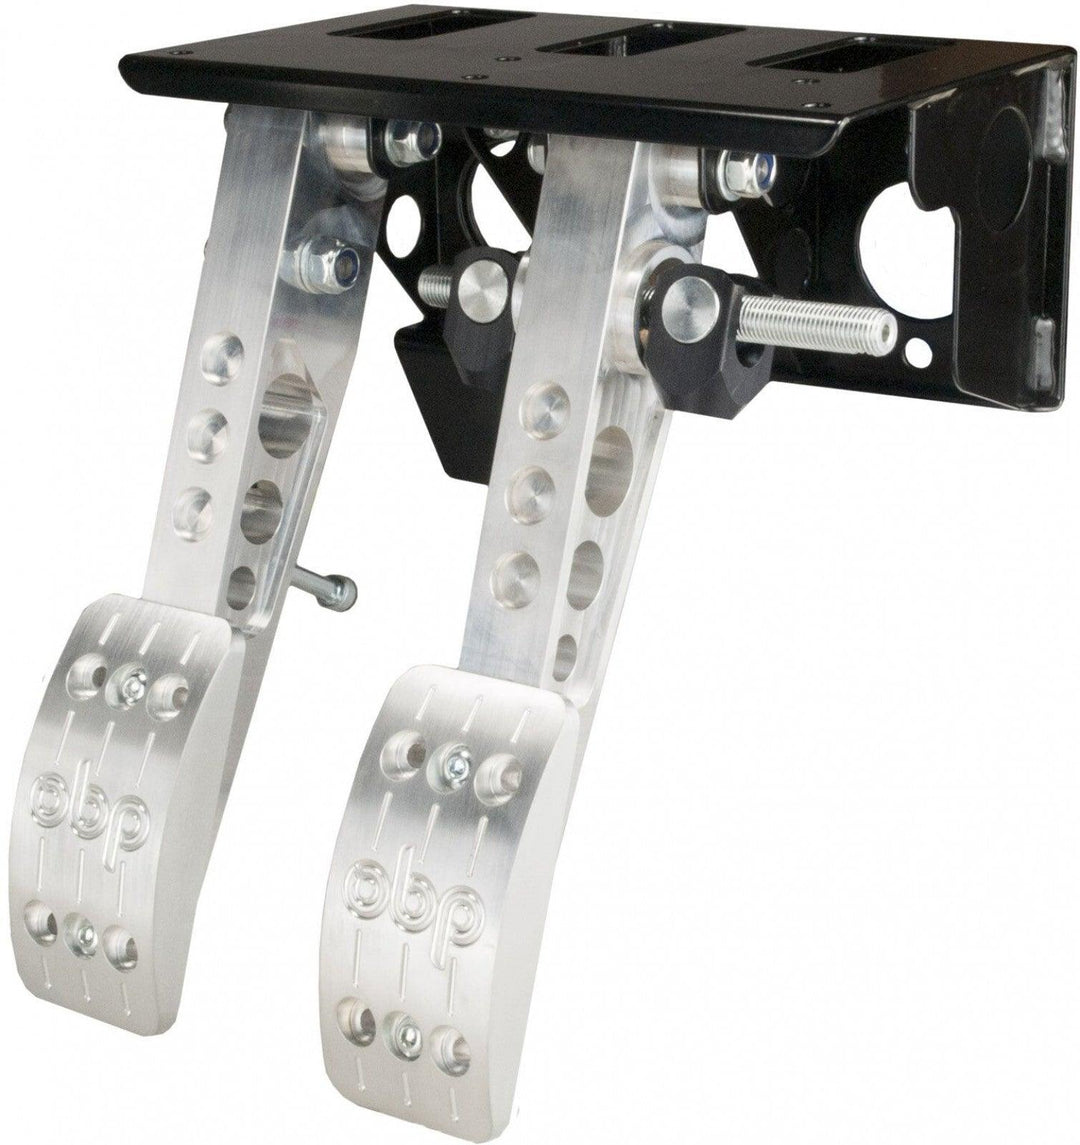 obp Motorsport Pro-Race V2 2 Pedal System - Top Mounted Cockpit Fit - Attacking the Clock Racing